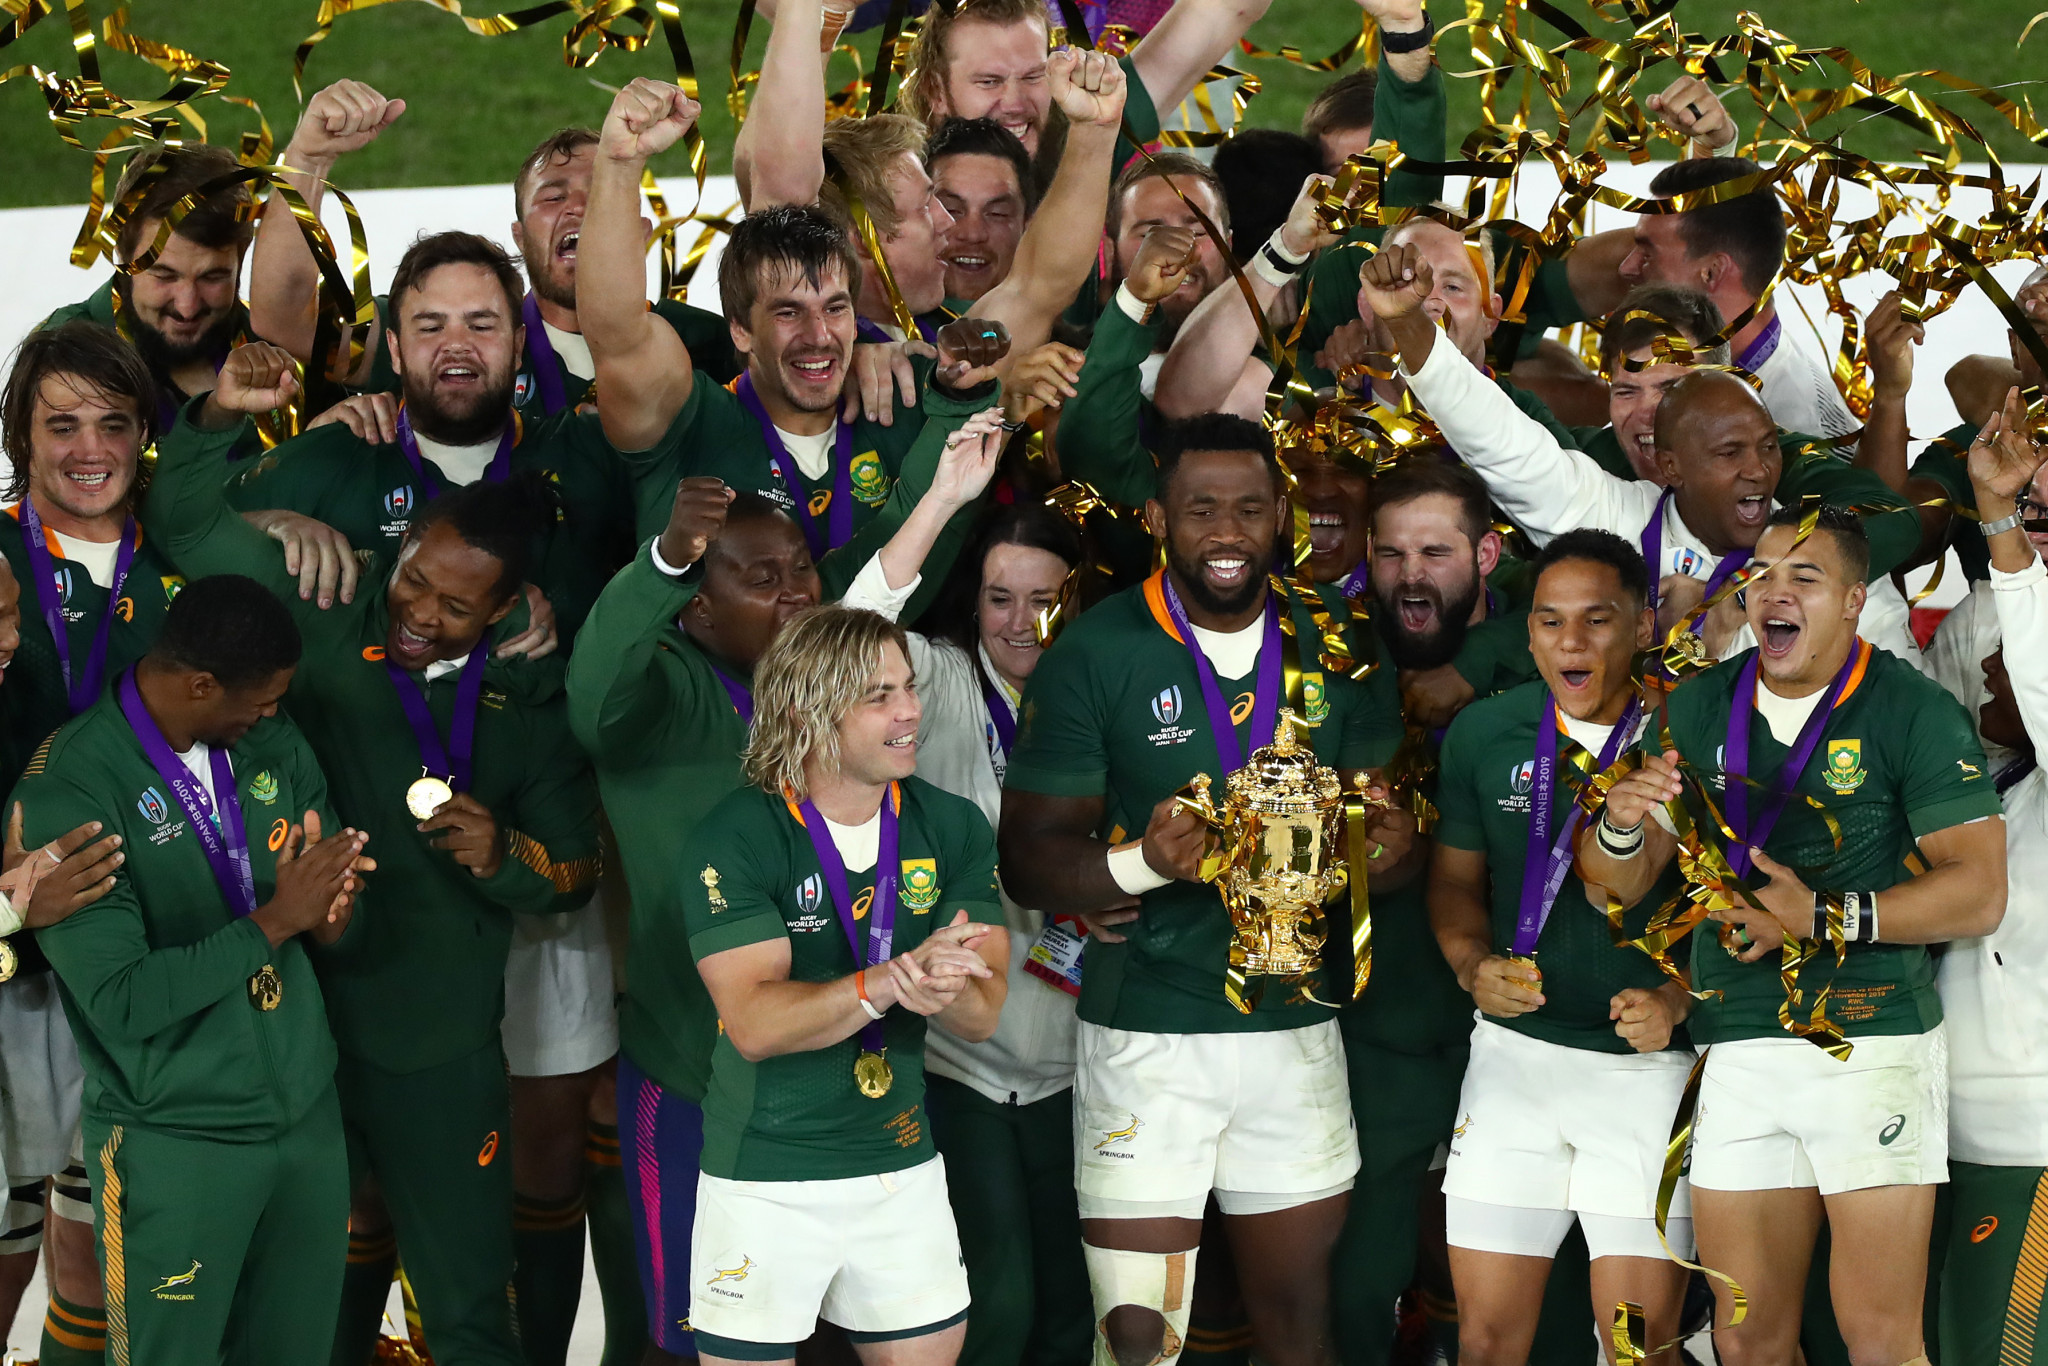 Cheslin Kolbe won the Rugby World Cup last year with South Africa ©Getty Images